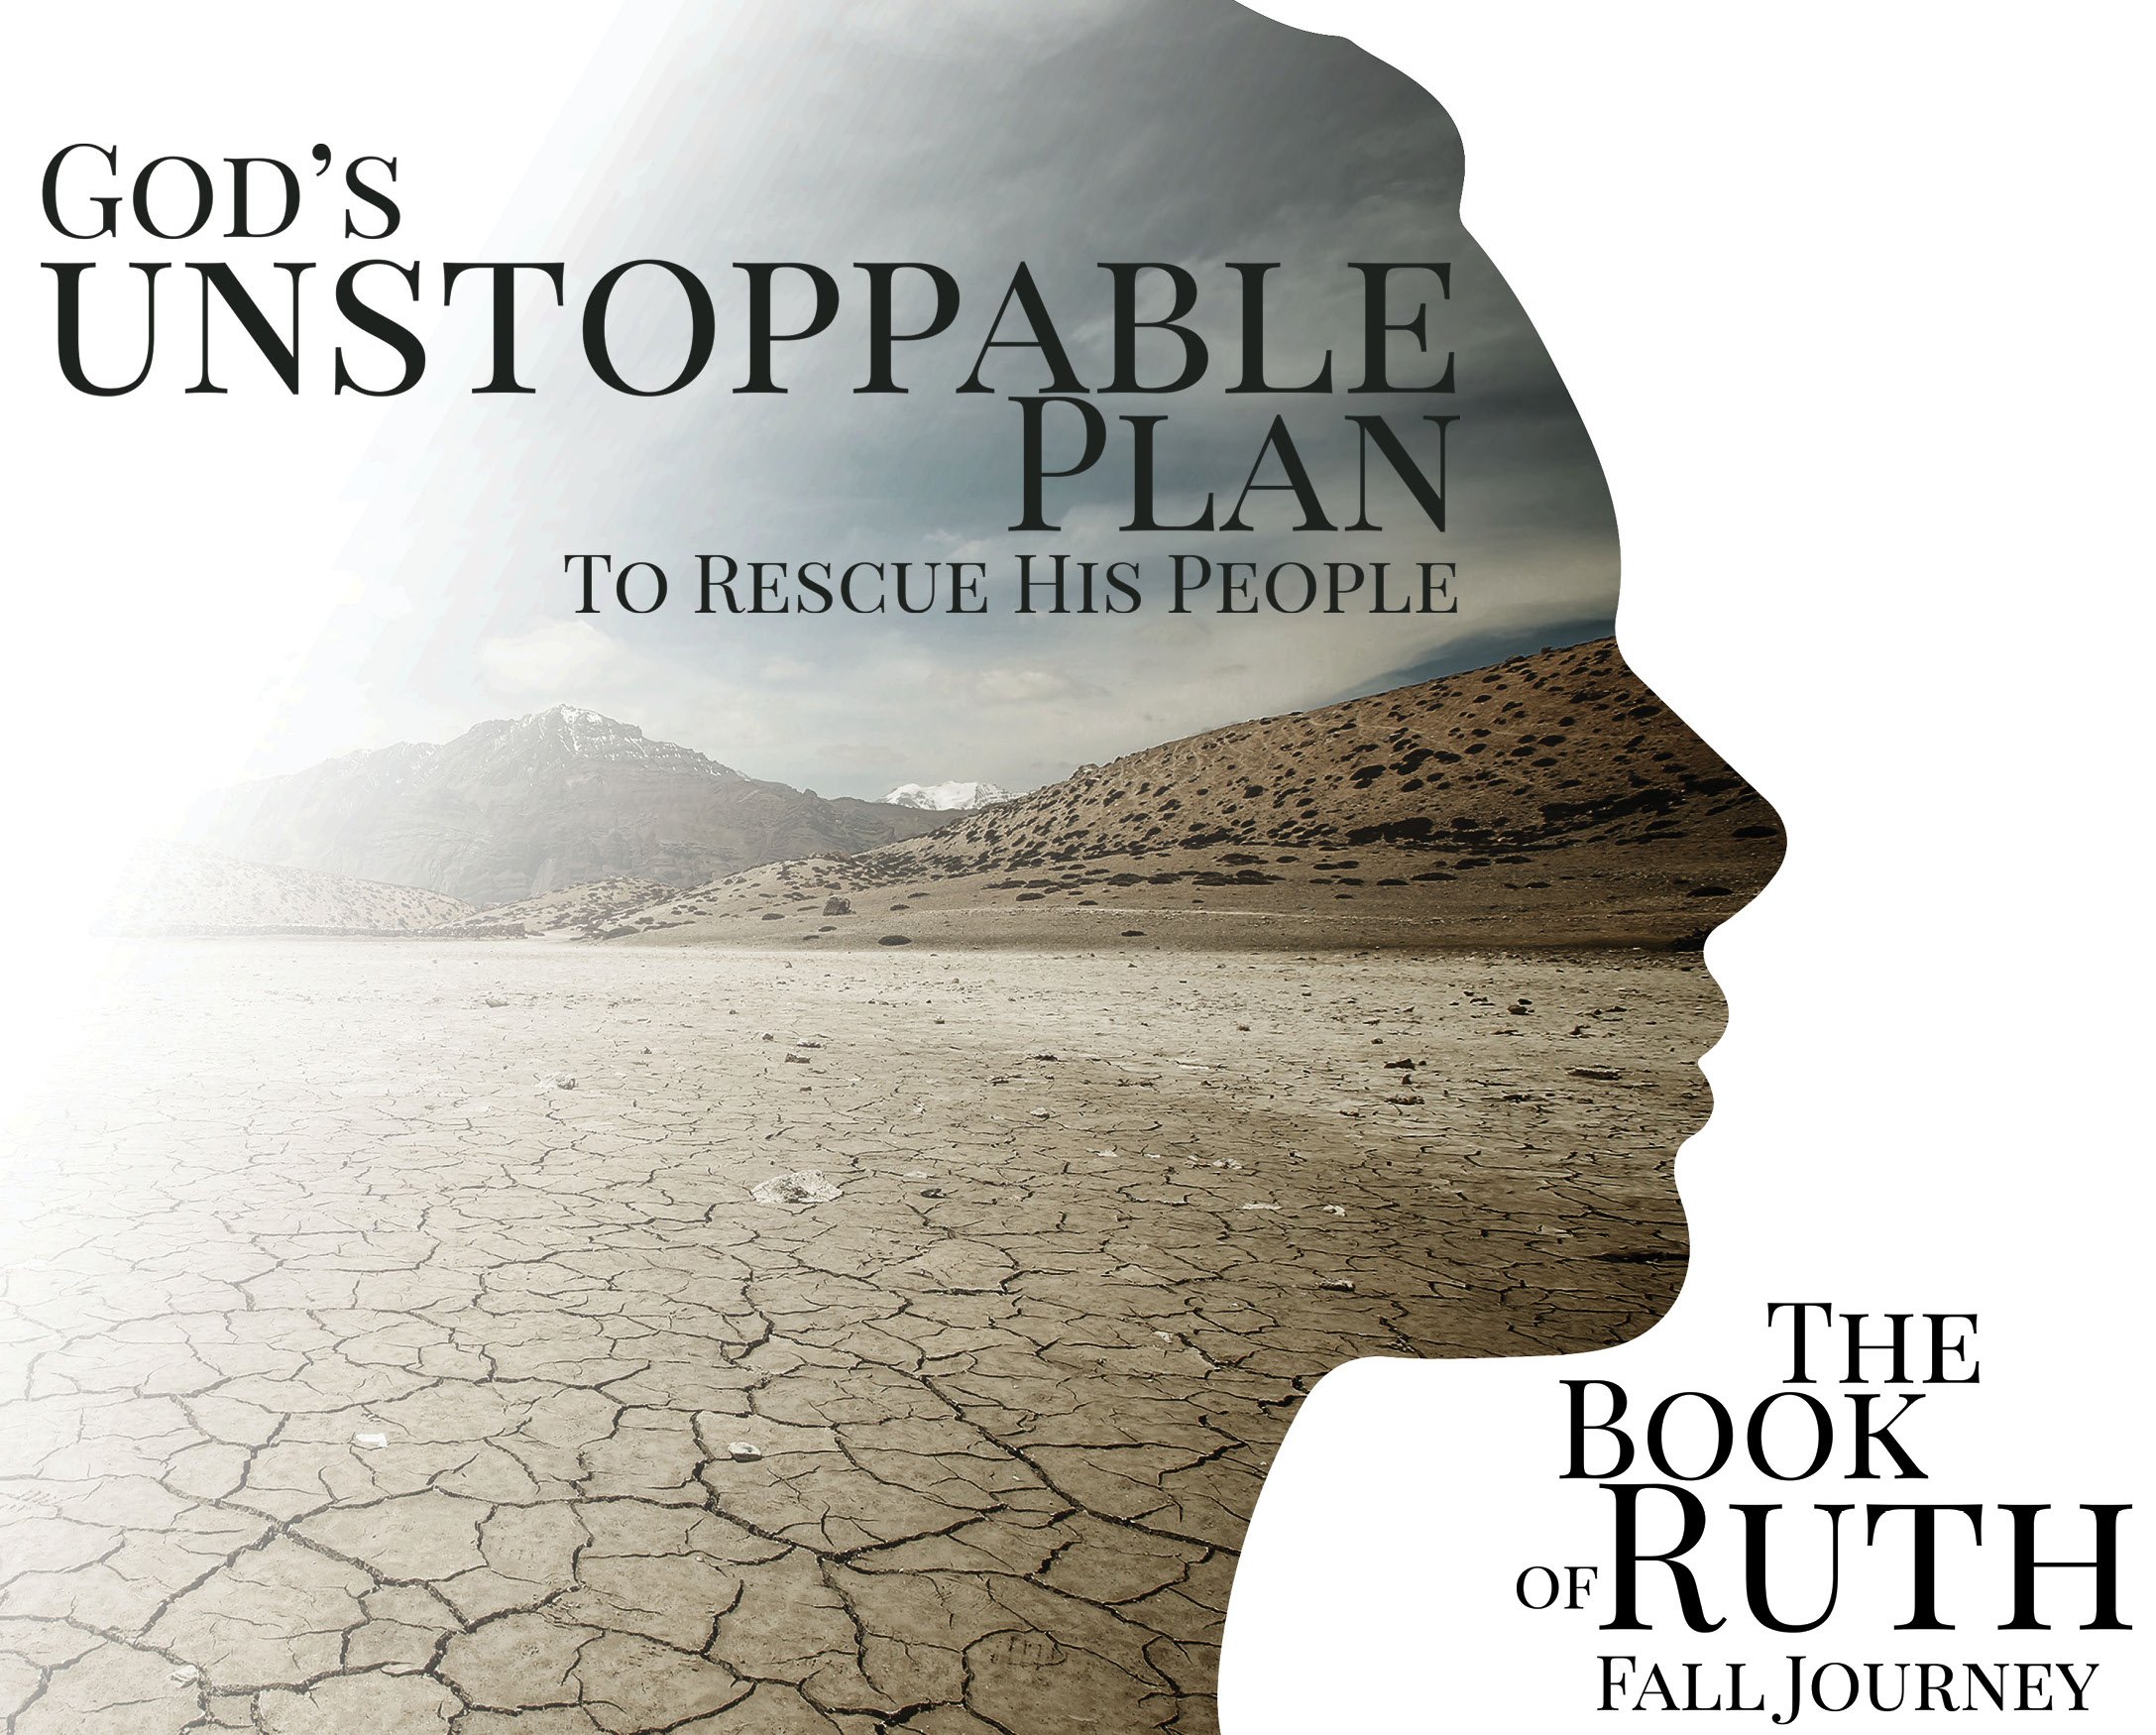 God’s Unstoppable Plan to Rescue His People: Redeemer